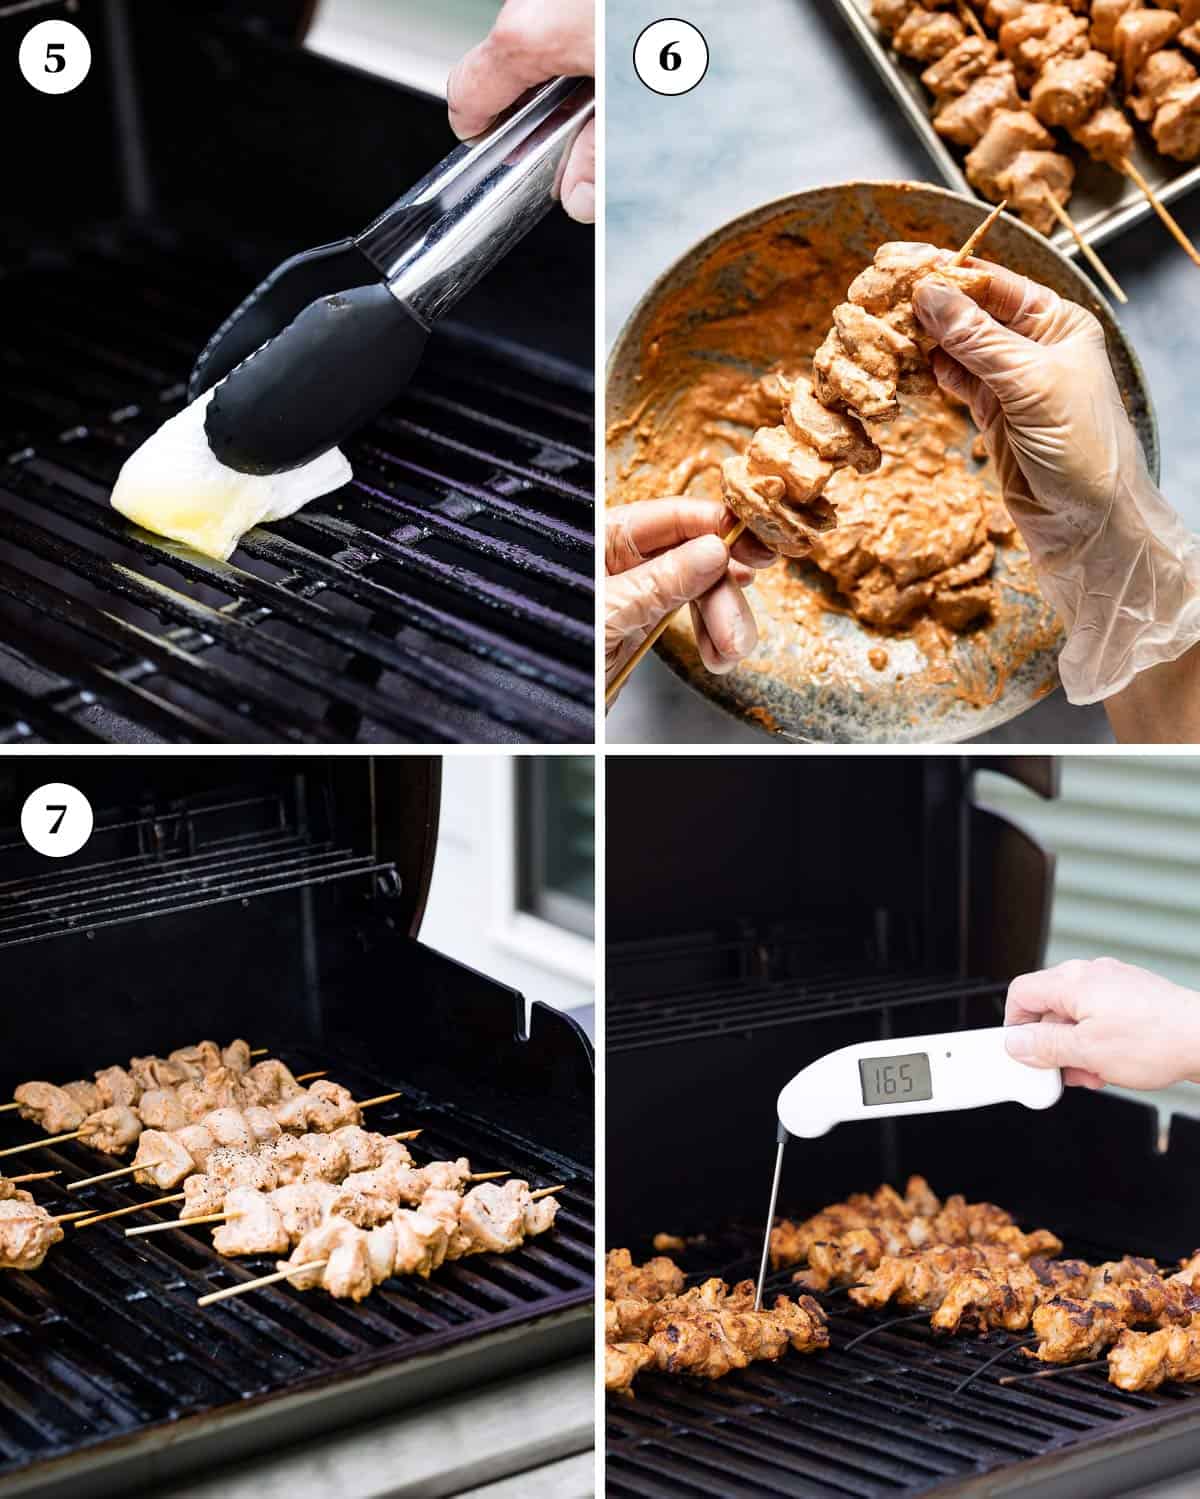 Person showing how to cook lebanese chicken kabobs in a collage of images.